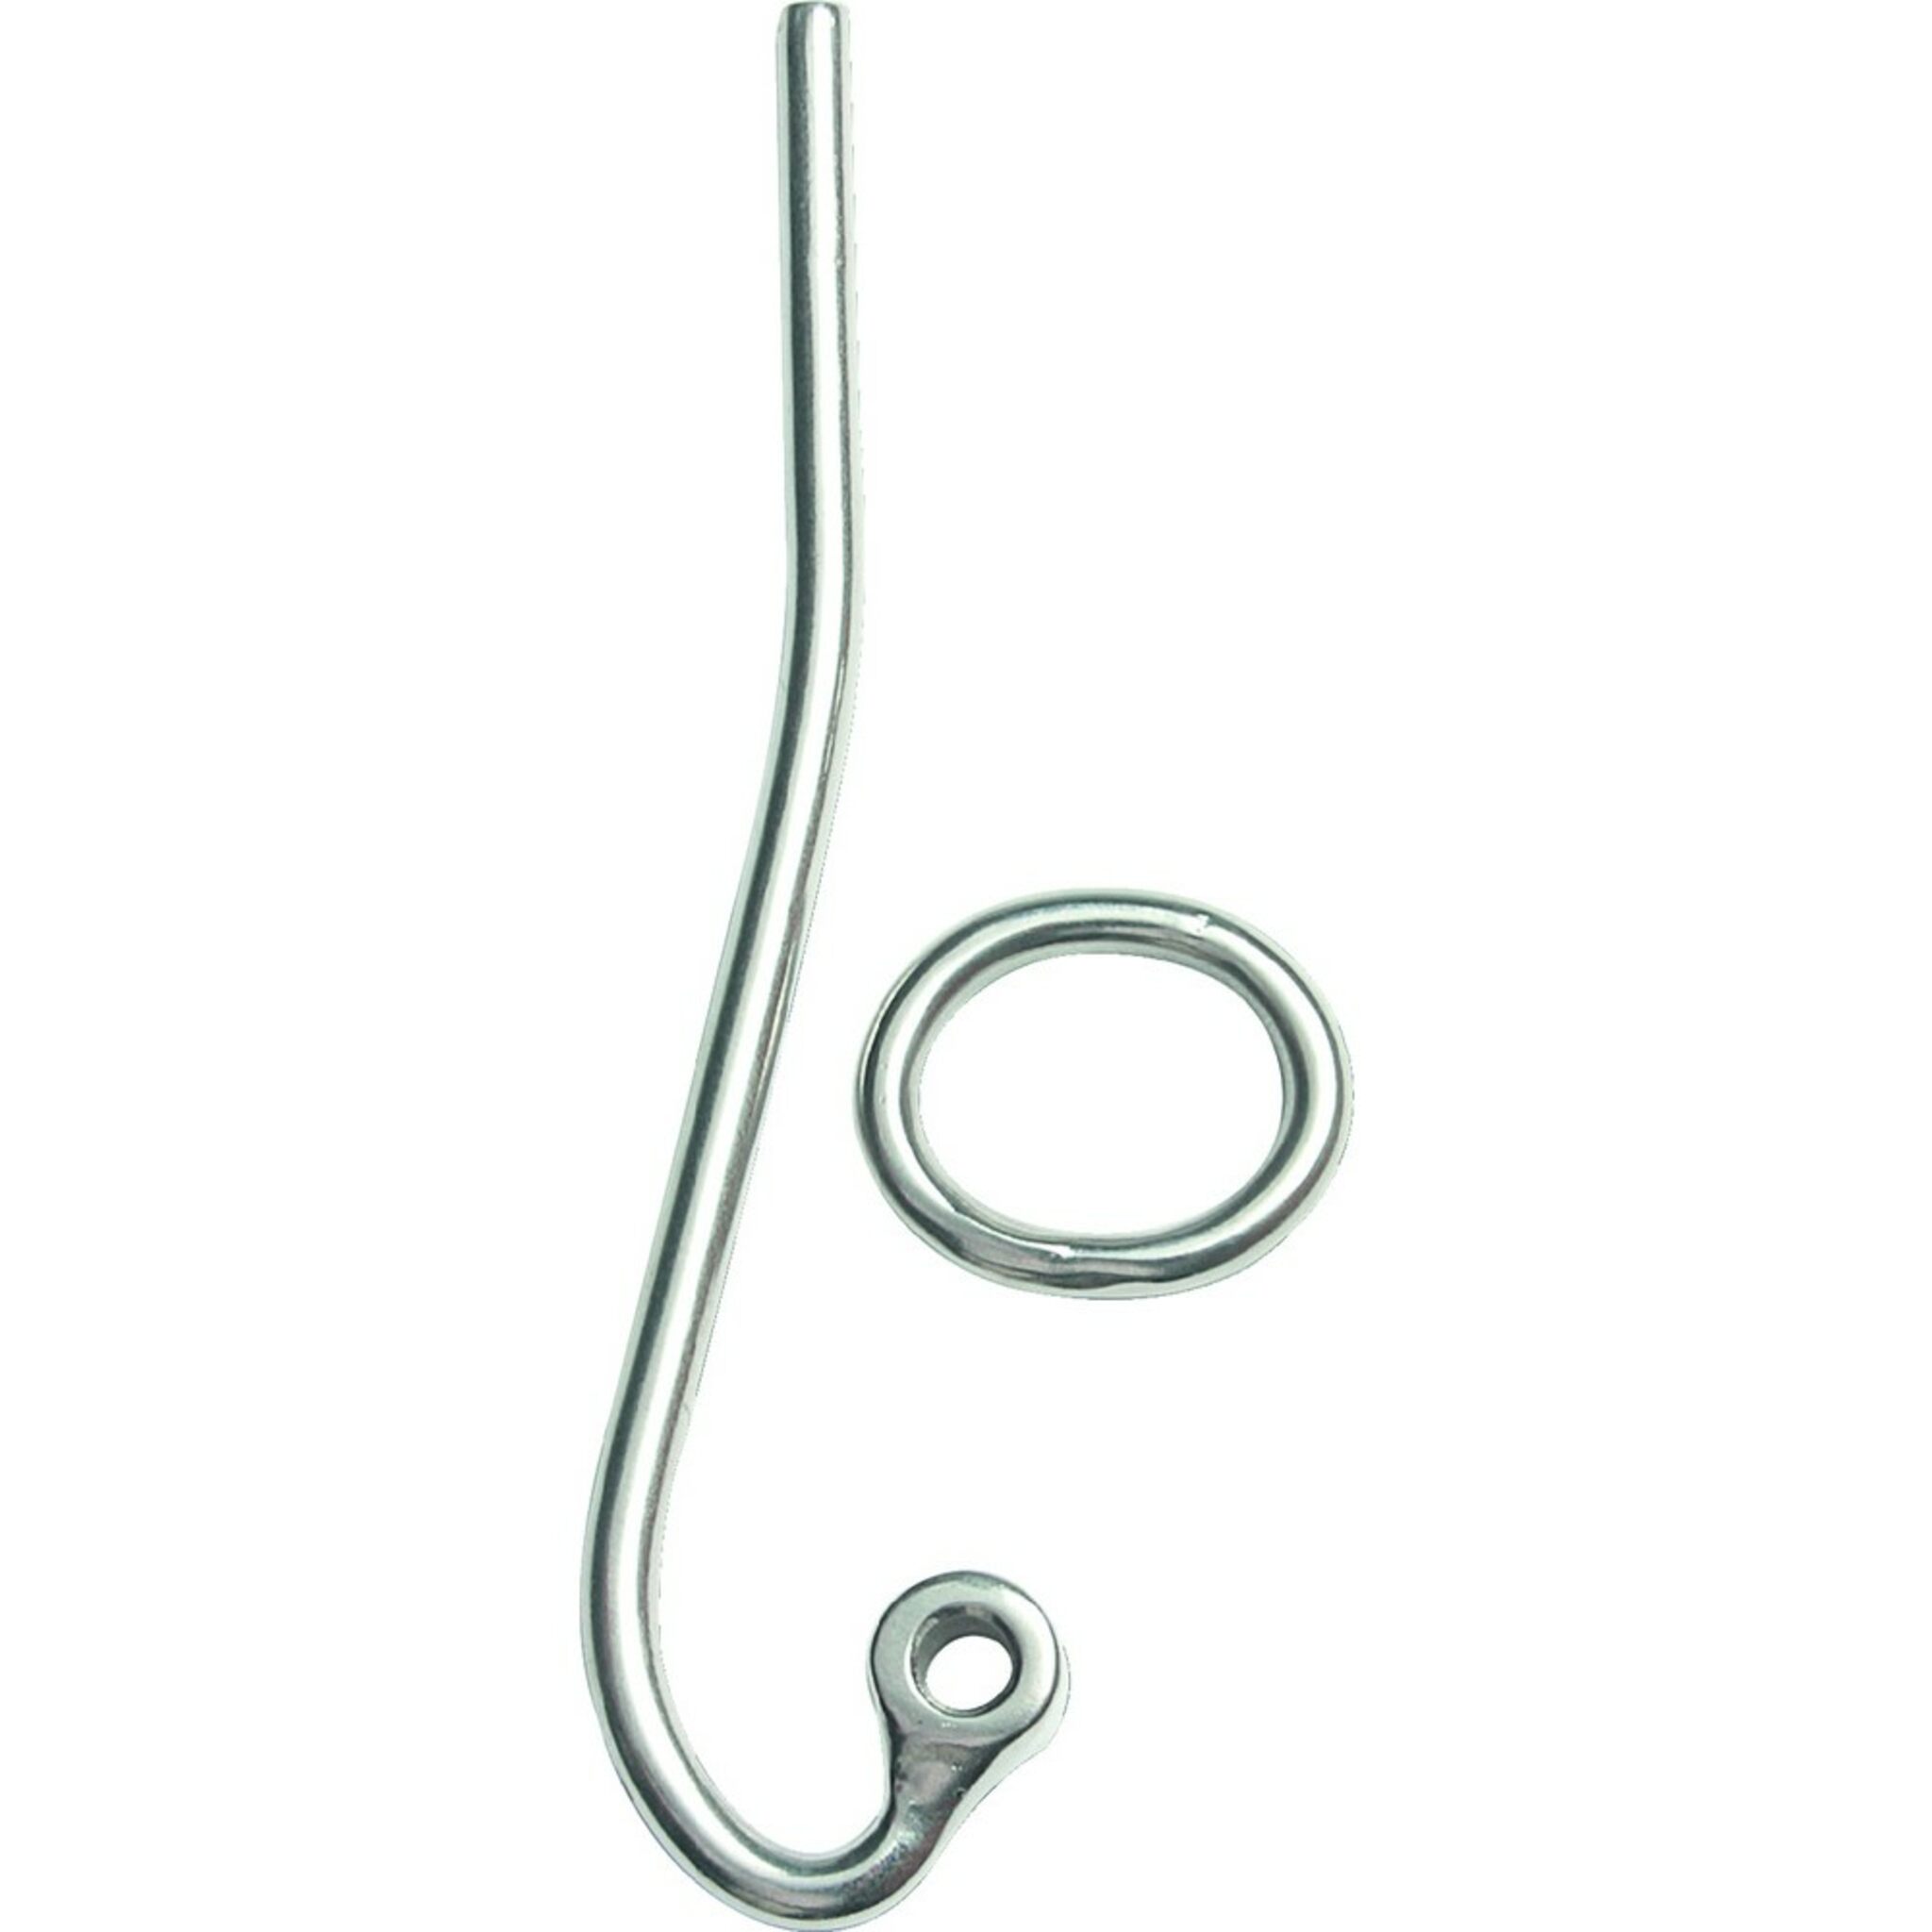 Slip hook with ring for shroud turnbuckle